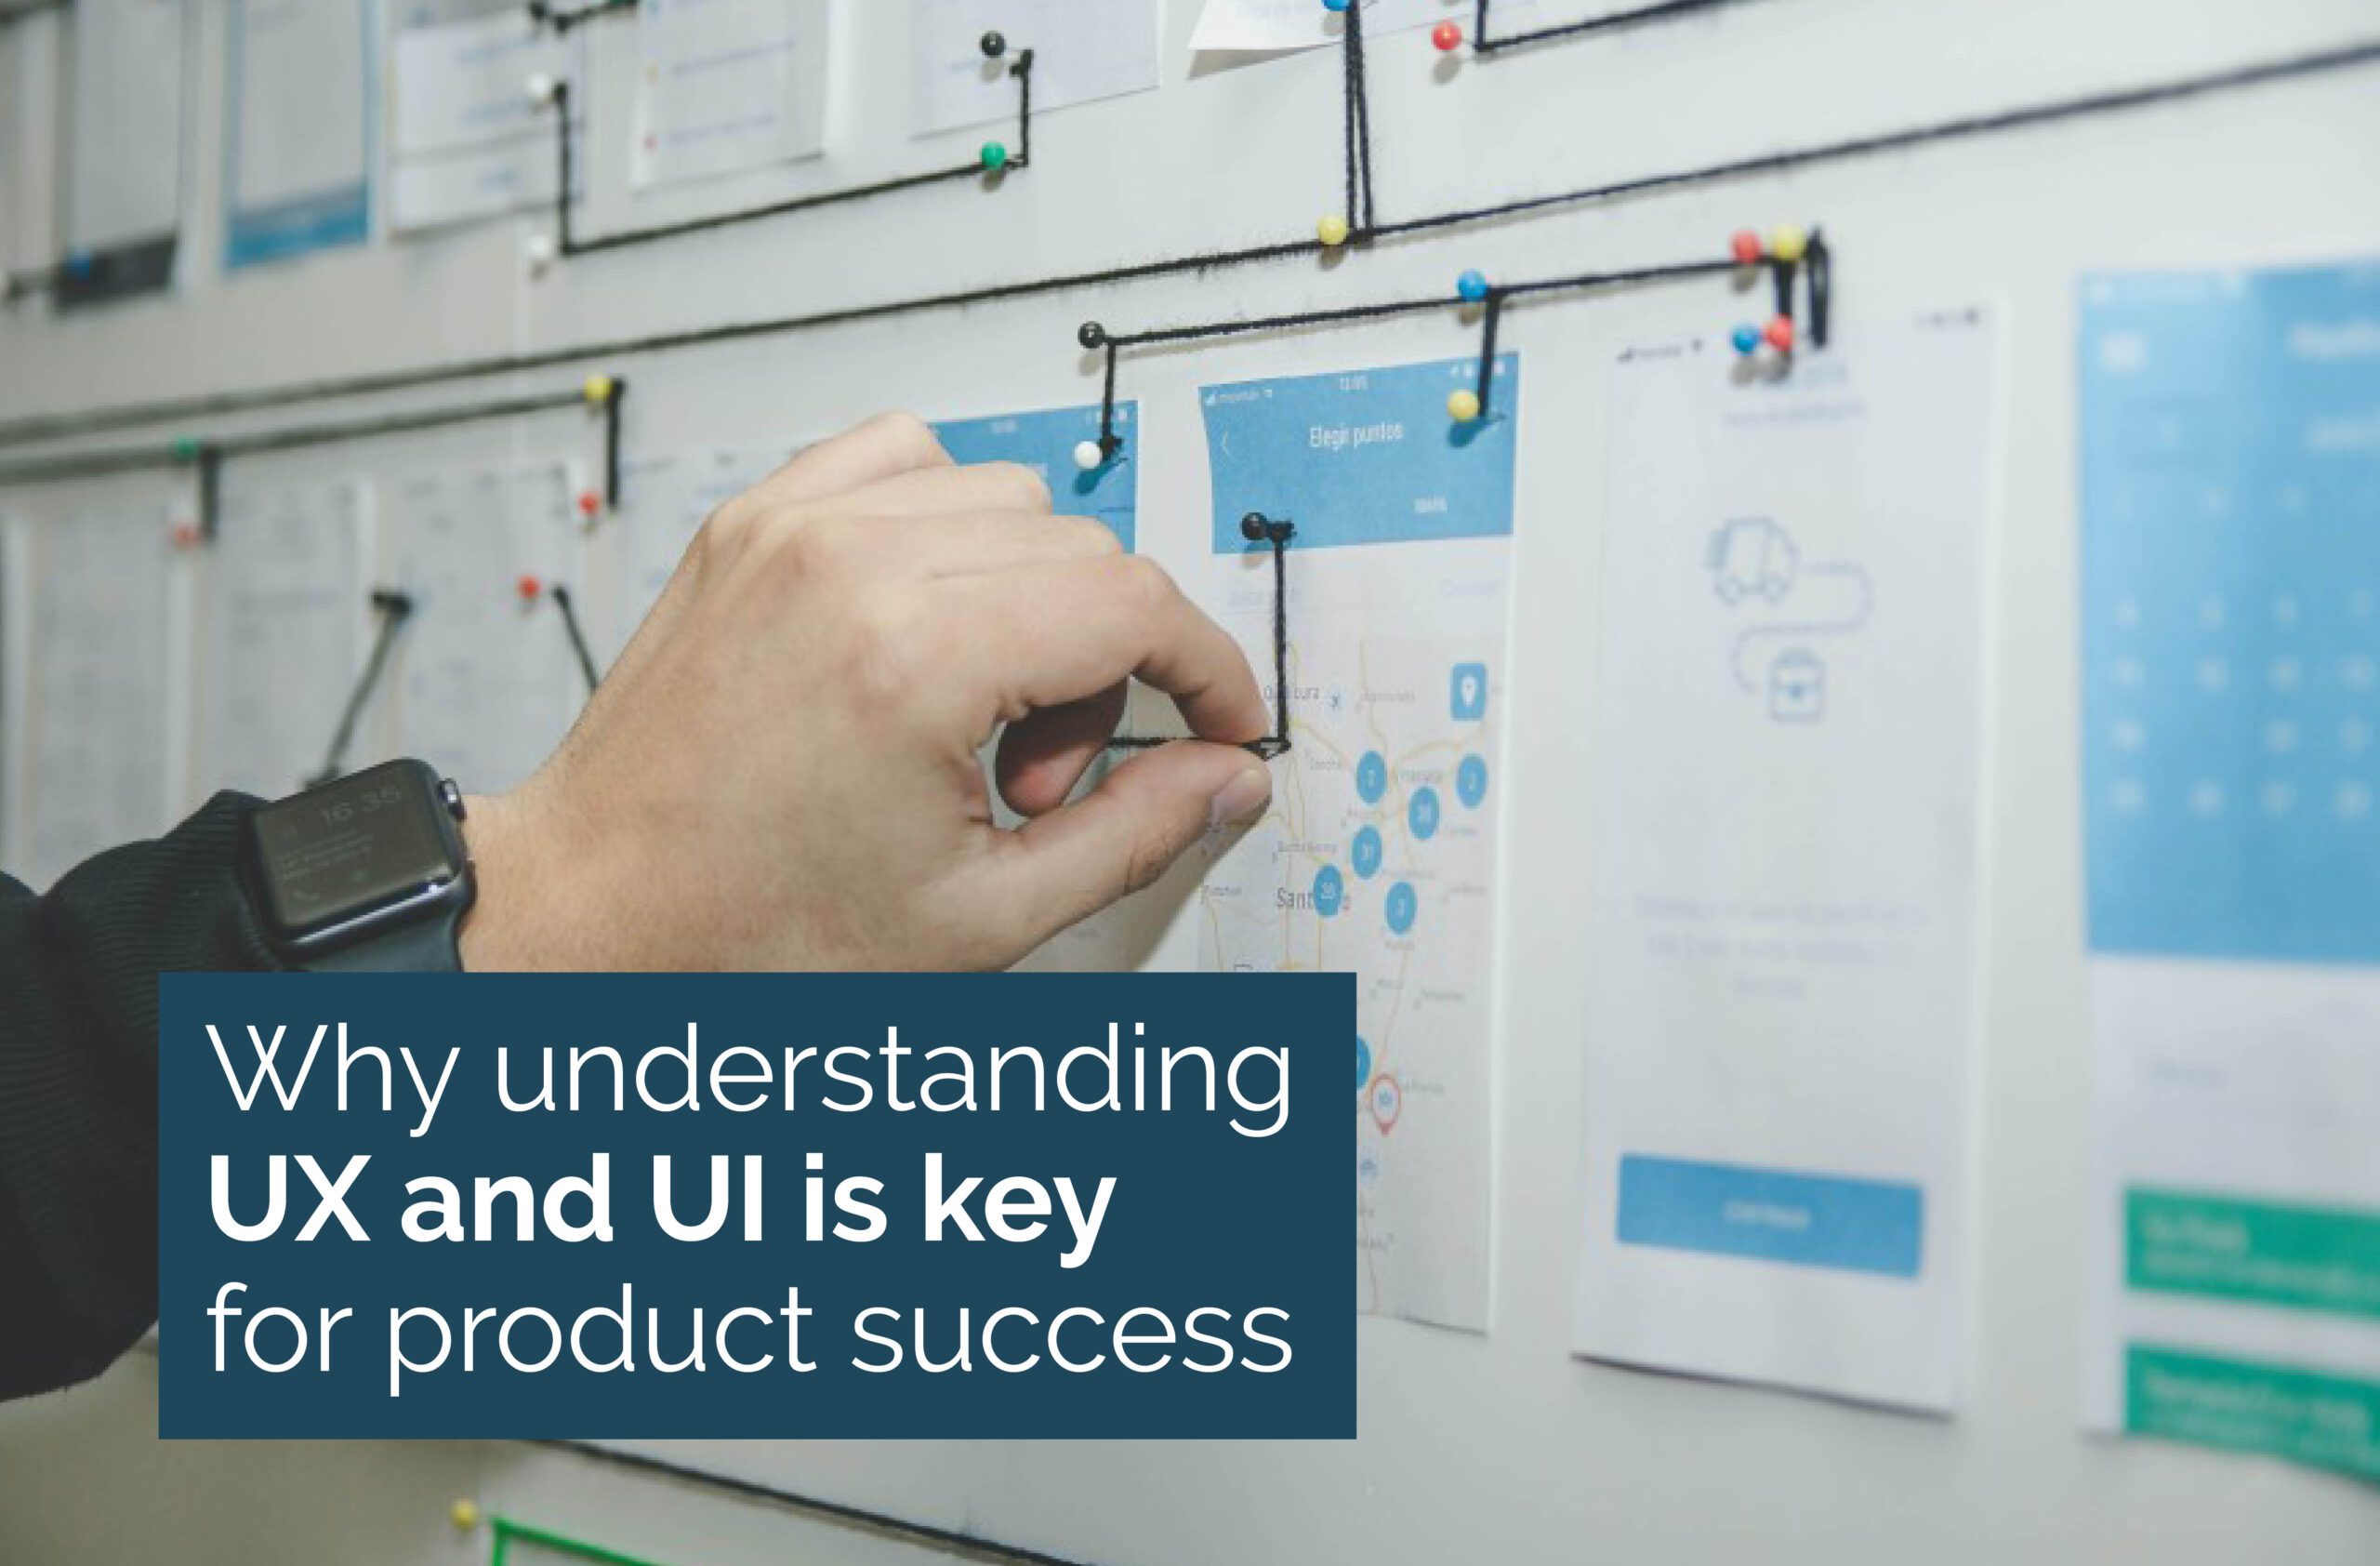 Why understanding UX and UI is key for product success